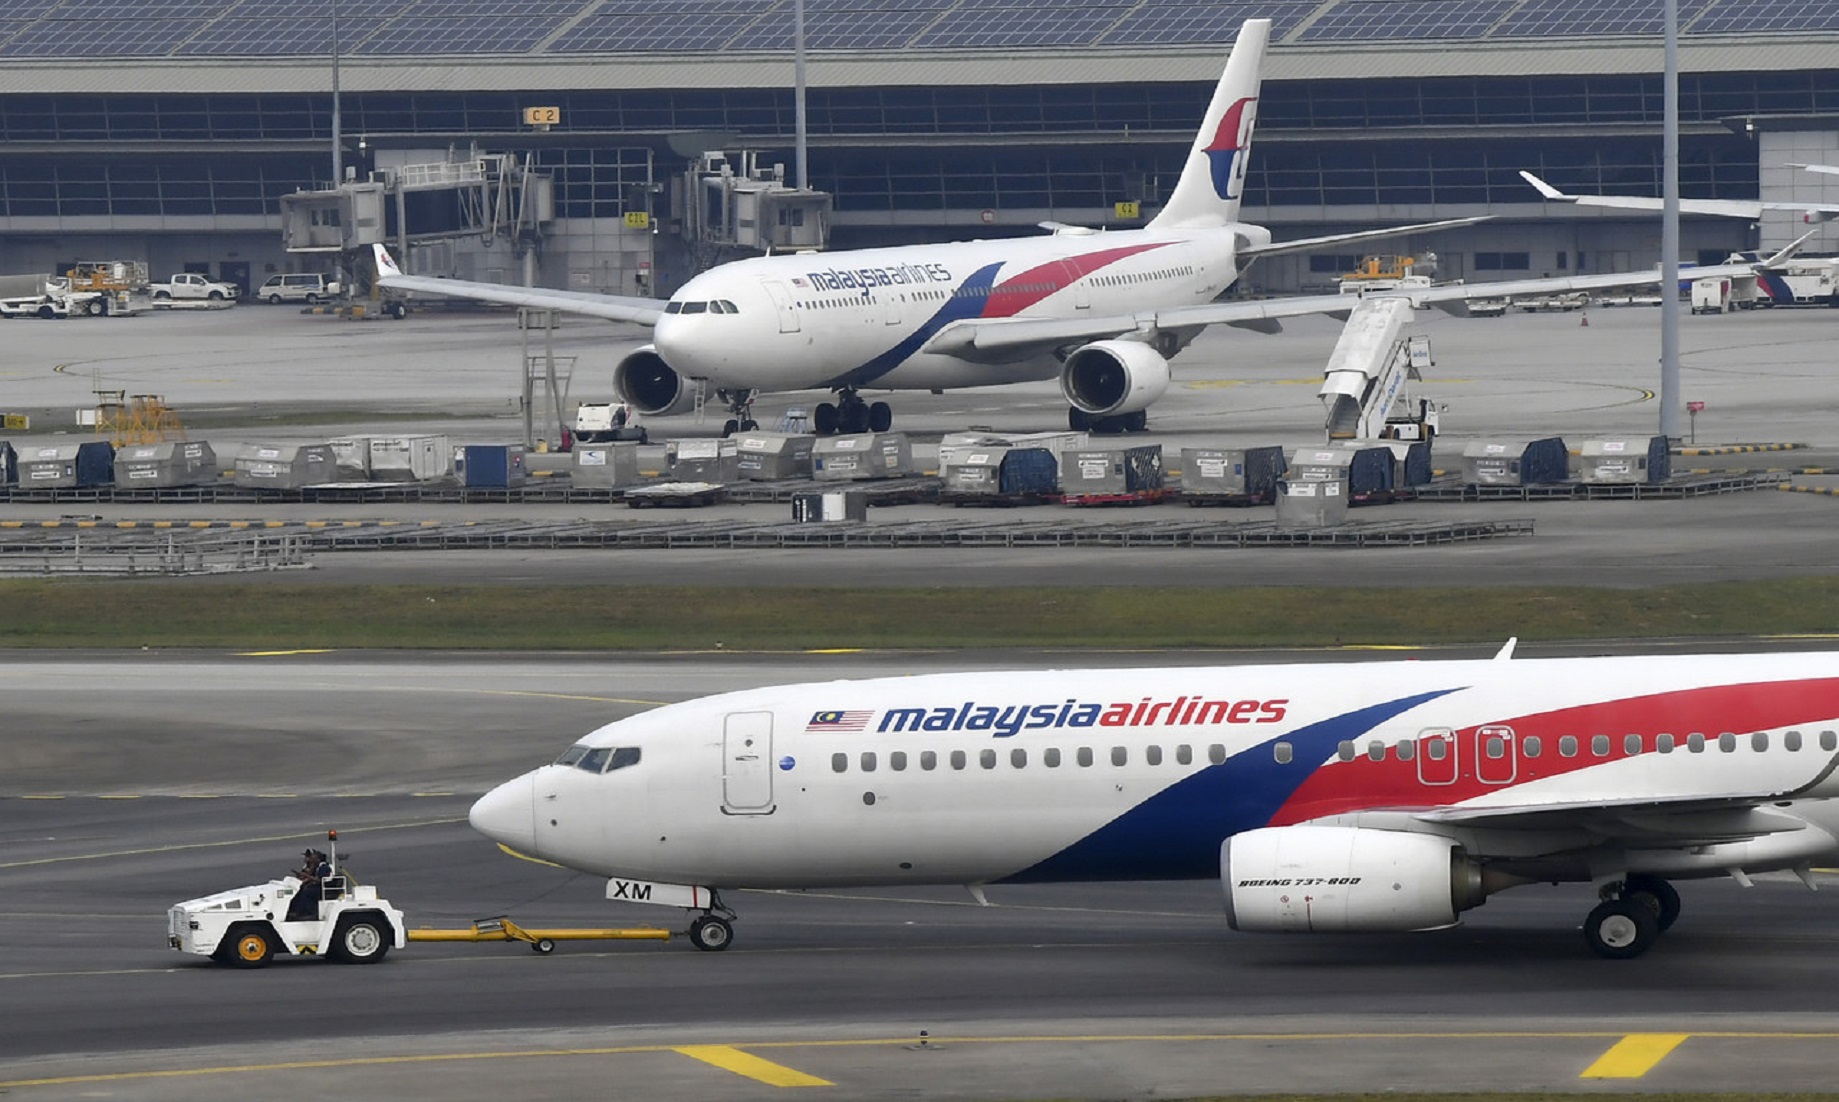 Up to Khazanah to sort out Malaysia Airlines’ quandary – Tengku Zafrul